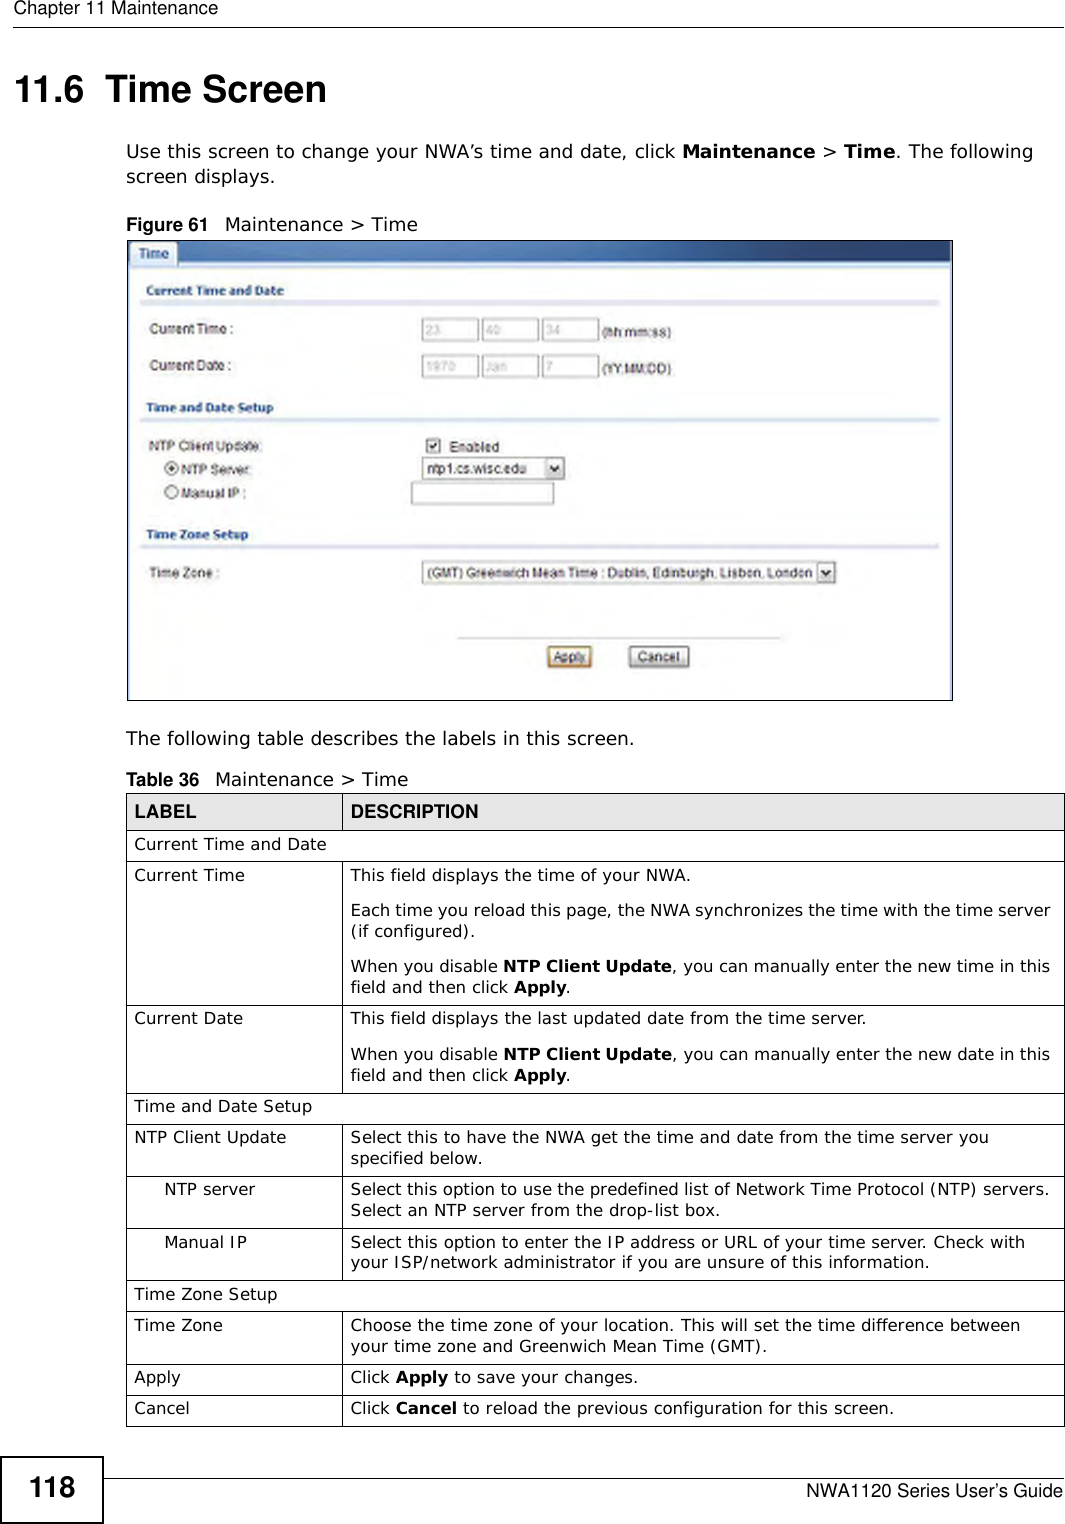 Chapter 11 MaintenanceNWA1120 Series User’s Guide11811.6  Time ScreenUse this screen to change your NWA’s time and date, click Maintenance &gt; Time. The following screen displays.Figure 61   Maintenance &gt; TimeThe following table describes the labels in this screen.Table 36   Maintenance &gt; TimeLABEL DESCRIPTIONCurrent Time and DateCurrent Time This field displays the time of your NWA.Each time you reload this page, the NWA synchronizes the time with the time server (if configured).When you disable NTP Client Update, you can manually enter the new time in this field and then click Apply. Current Date This field displays the last updated date from the time server.When you disable NTP Client Update, you can manually enter the new date in this field and then click Apply. Time and Date SetupNTP Client Update Select this to have the NWA get the time and date from the time server you specified below.NTP server Select this option to use the predefined list of Network Time Protocol (NTP) servers. Select an NTP server from the drop-list box.Manual IP Select this option to enter the IP address or URL of your time server. Check with your ISP/network administrator if you are unsure of this information.Time Zone SetupTime Zone Choose the time zone of your location. This will set the time difference between your time zone and Greenwich Mean Time (GMT). Apply Click Apply to save your changes.Cancel Click Cancel to reload the previous configuration for this screen.